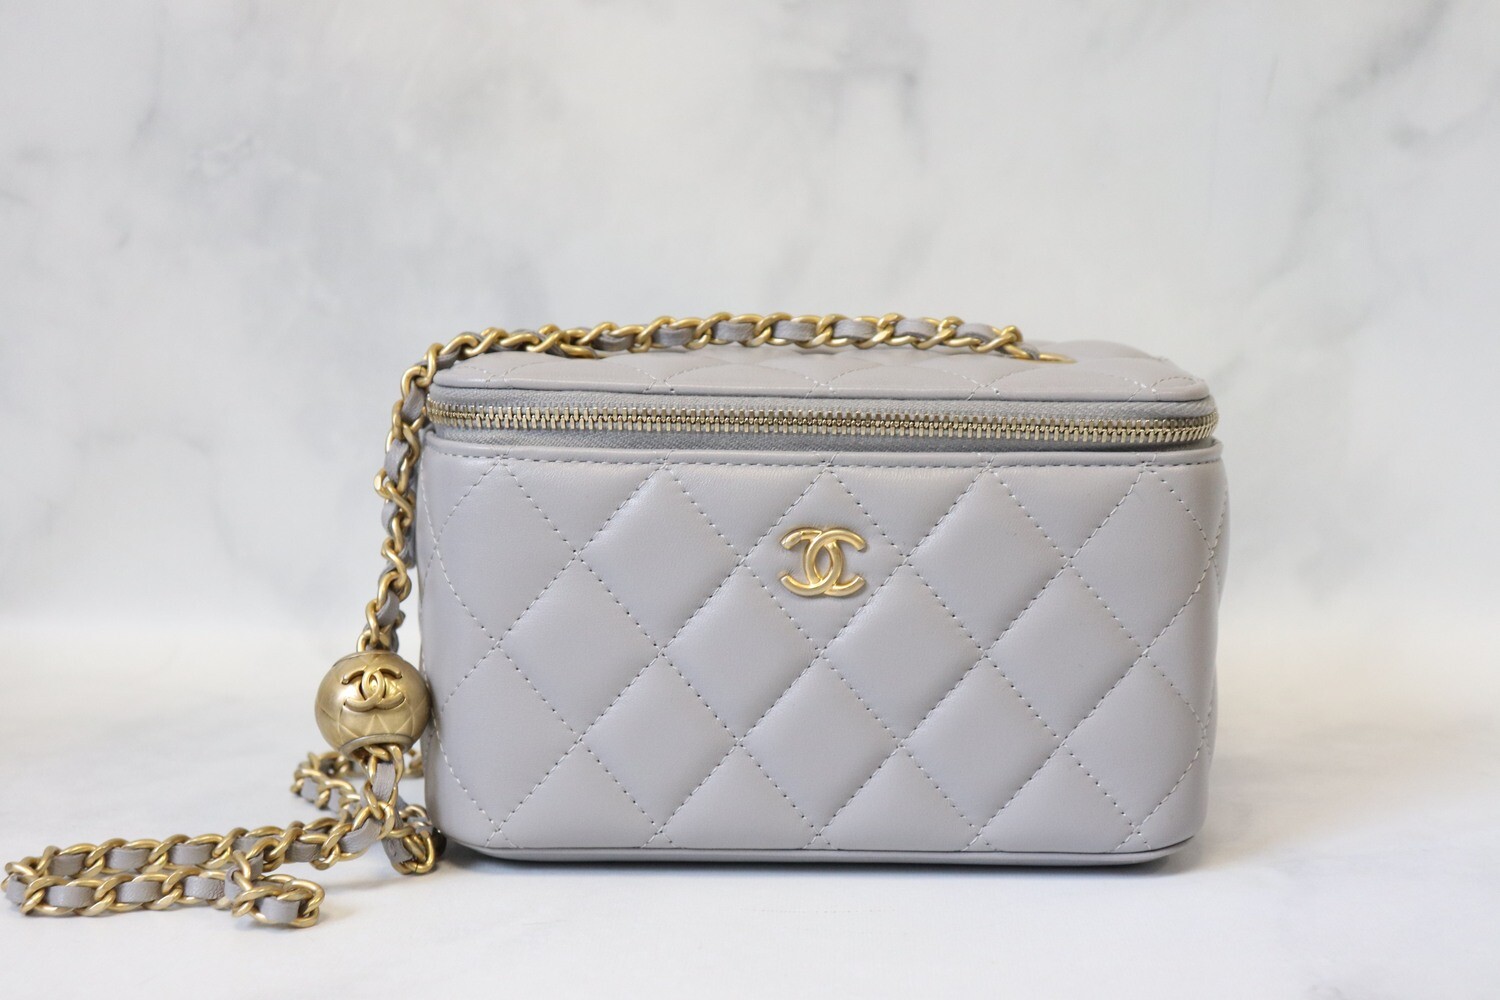 CHANEL Lambskin Quilted Small Pearl Crush Vanity Case With Chain Grey  1312339